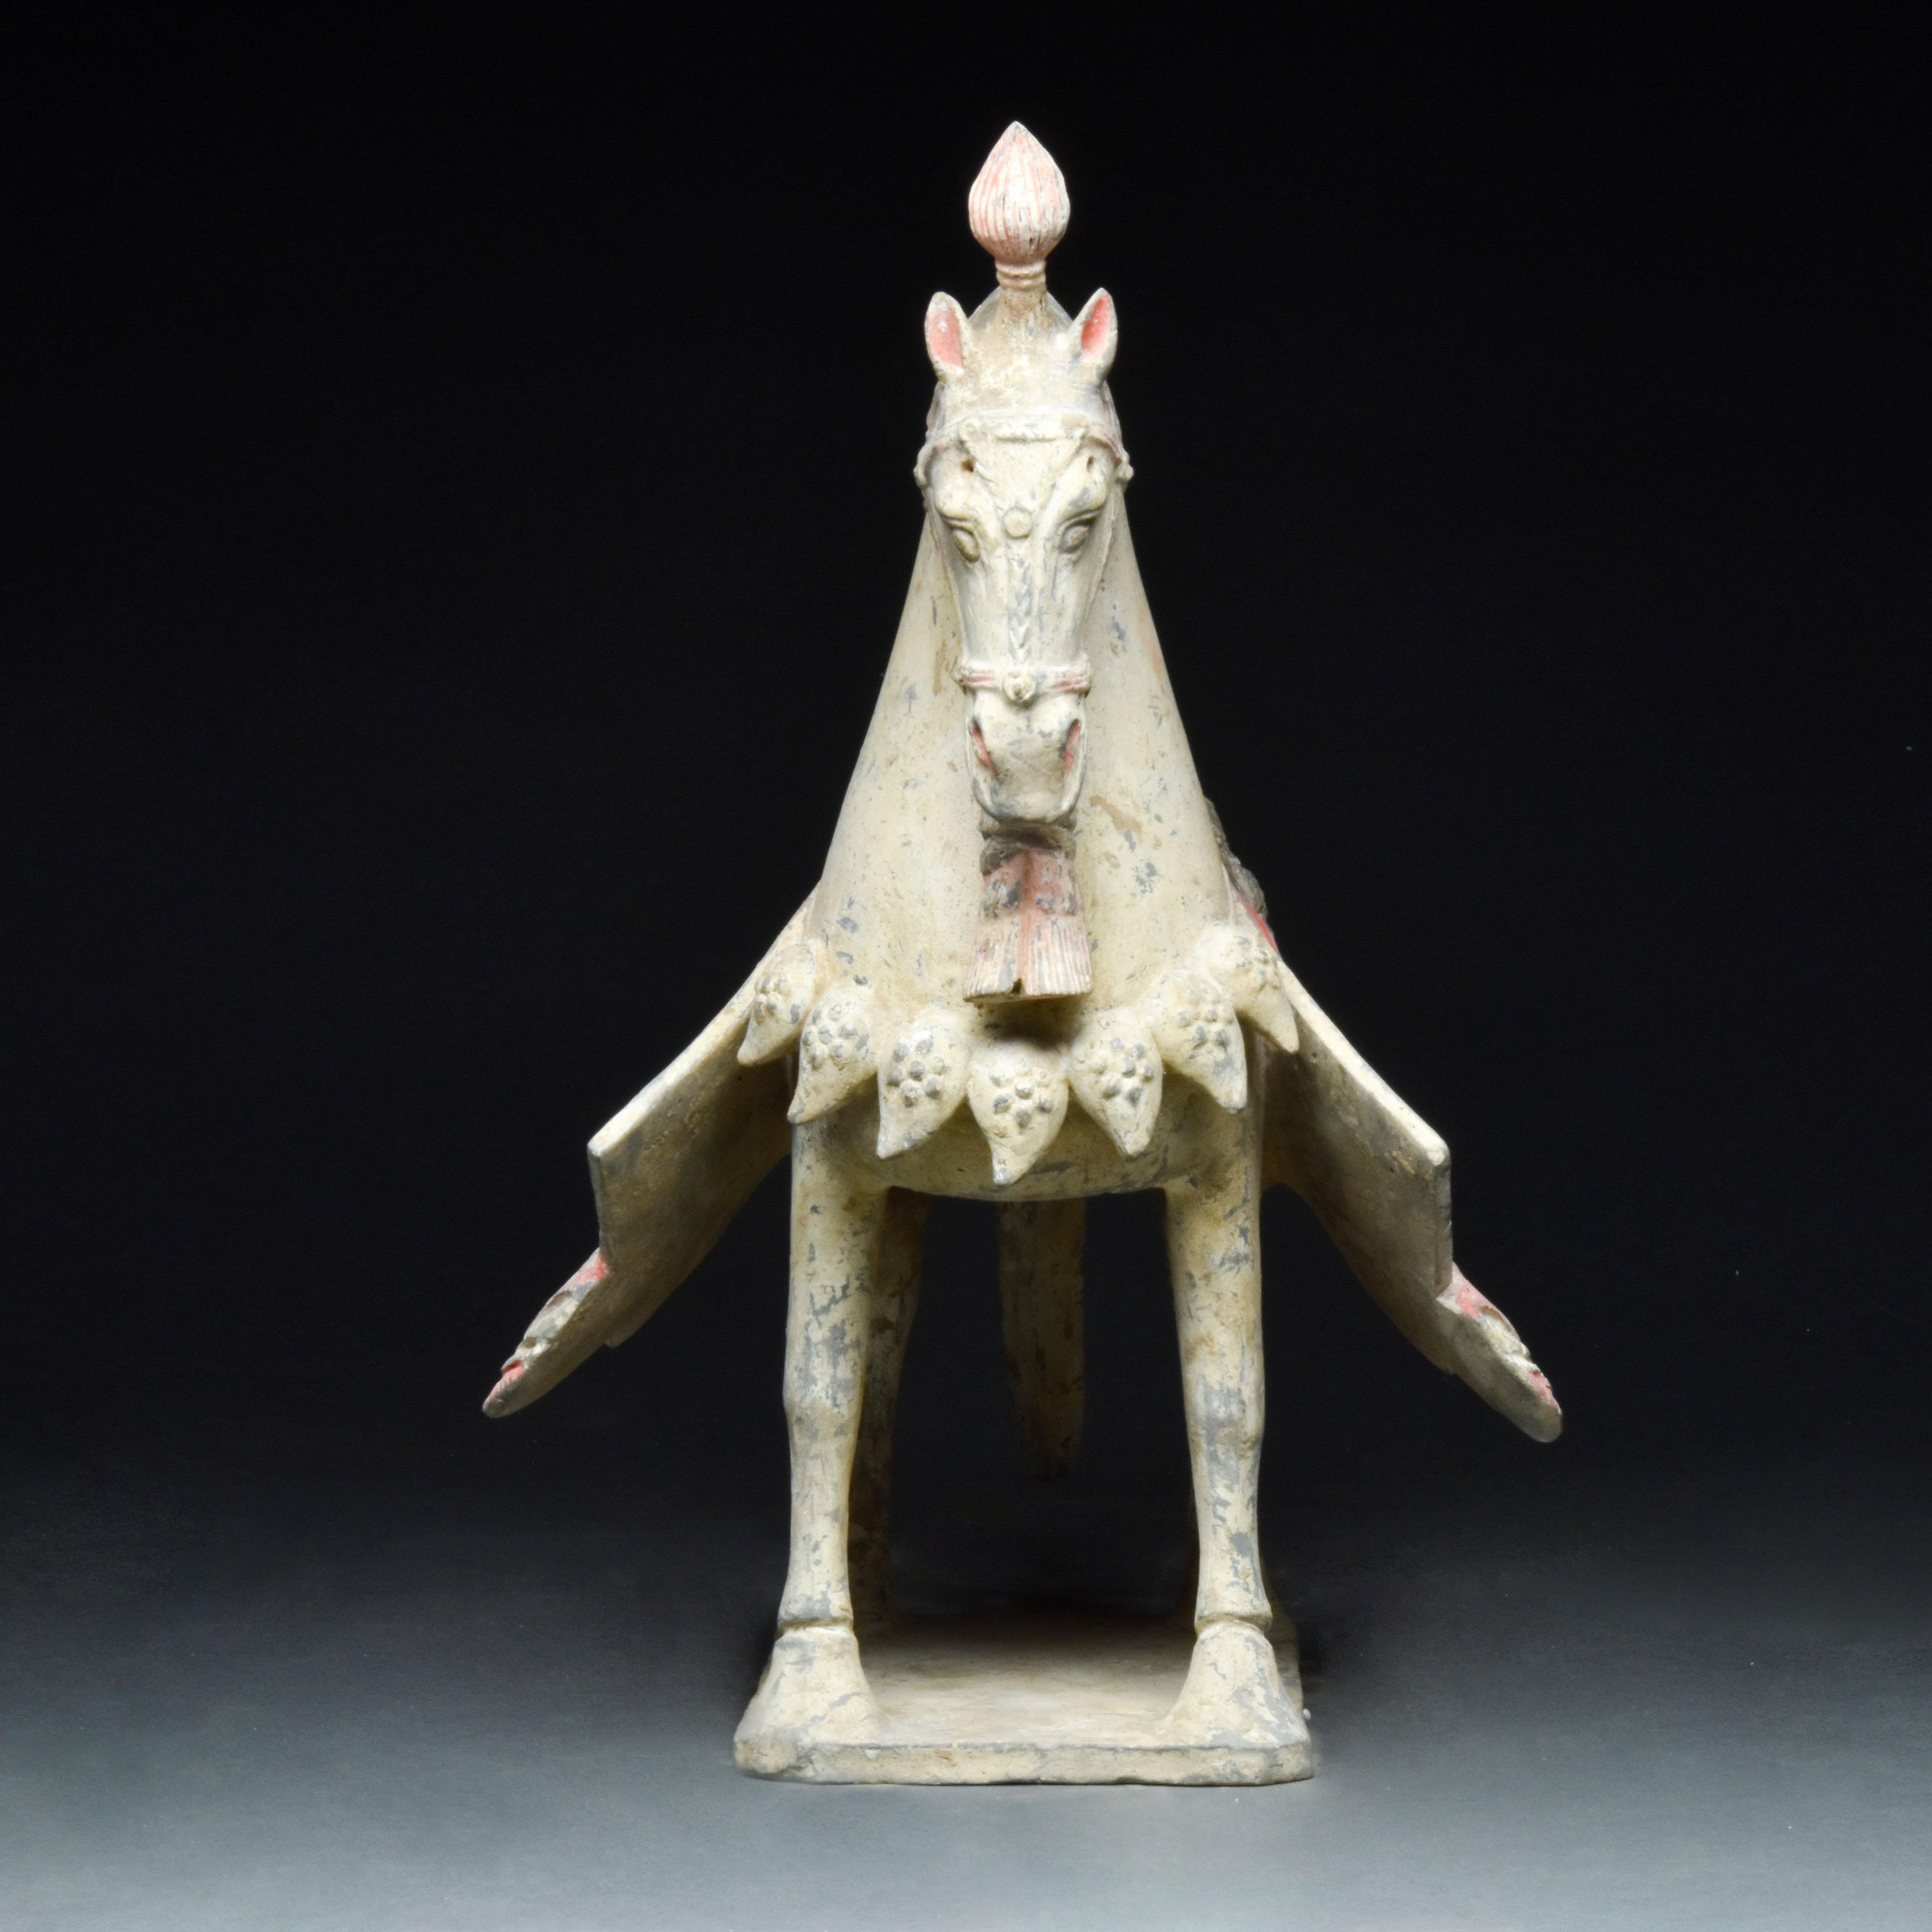 An elegant hollow-moulded terracotta horse. This horse is modelled in a standing pose with its neck elegantly arched and its ears pricked forward attentively. The mane is indicated with the use of a scalloped red design with white dotted details.